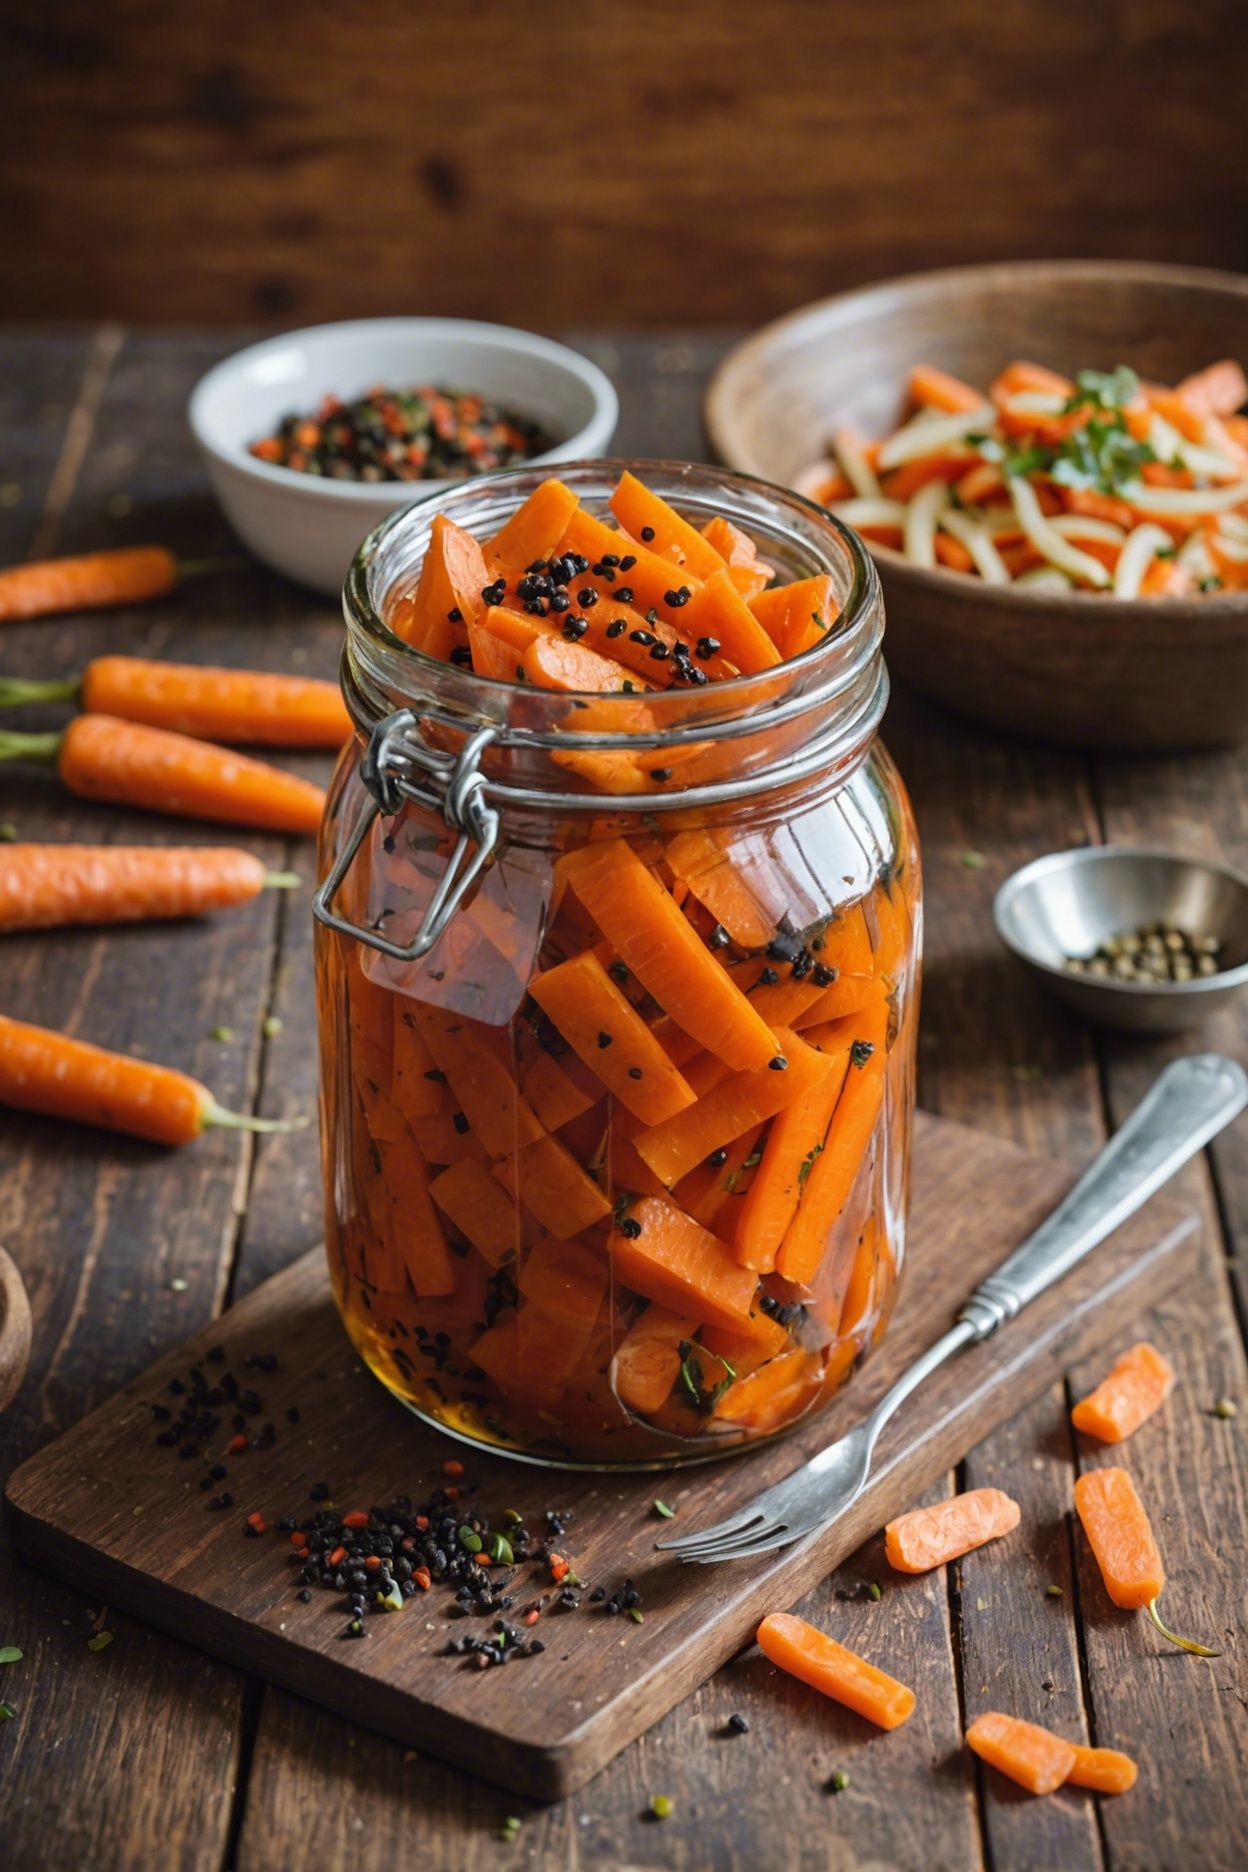 Spicy Pickled Carrots